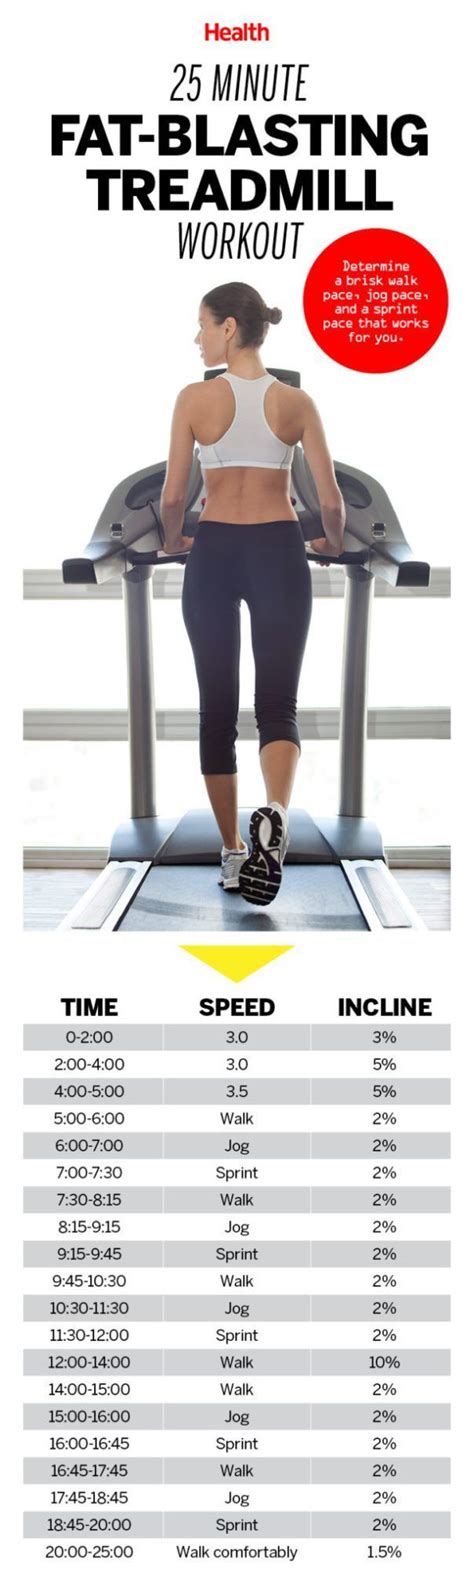 5 No Excuse Treadmill Workouts For Weight Loss Body Tones Treadmill